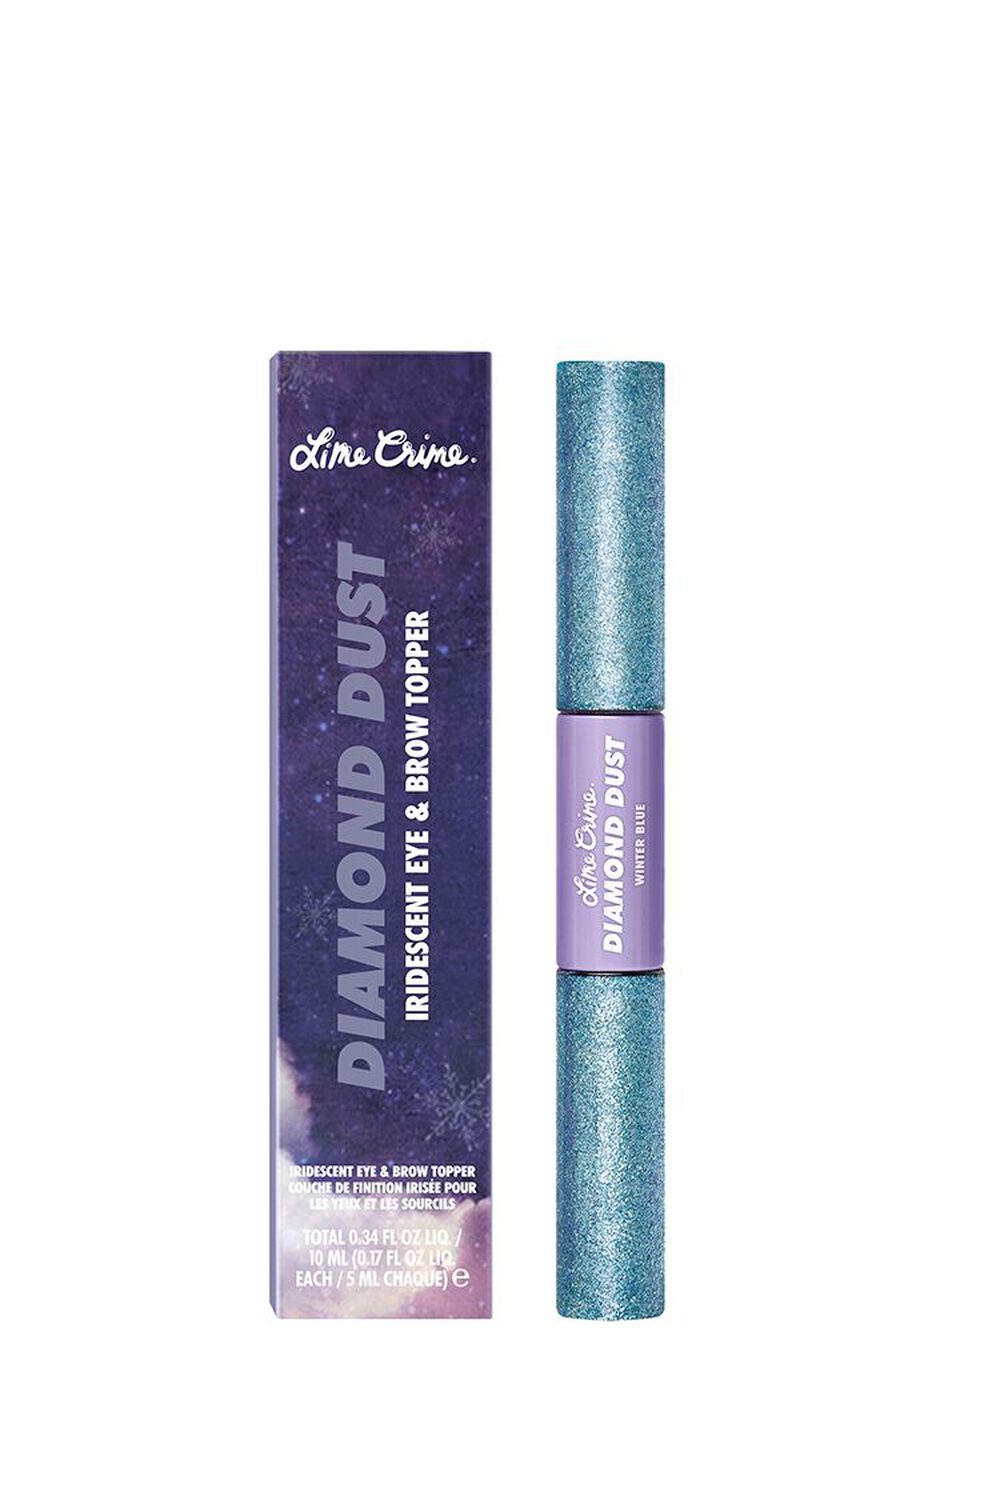 WINTER BLUE Lime Crime Diamond Dust Iridescent Eye and Brow Topper , image 1